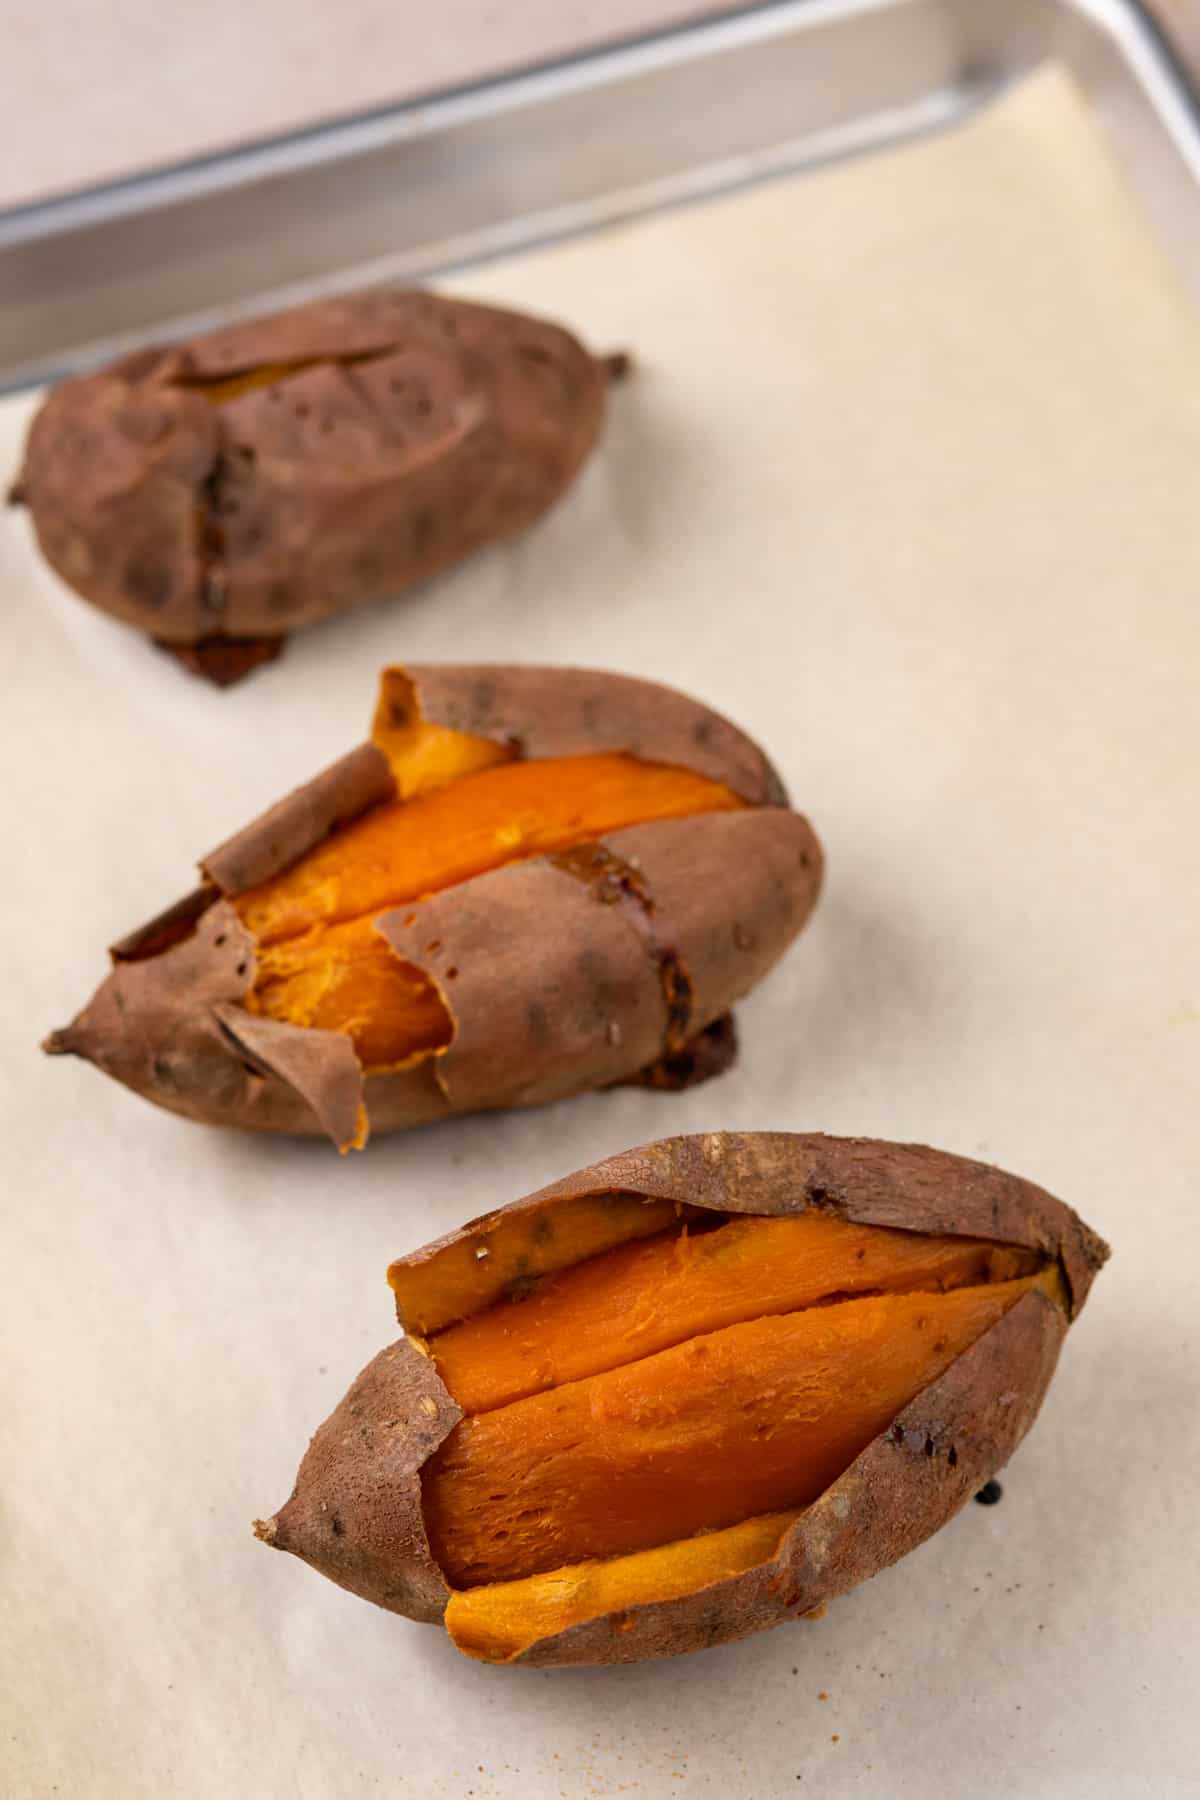 Baked sweet potatoes with their skins open to show their cooked centers.